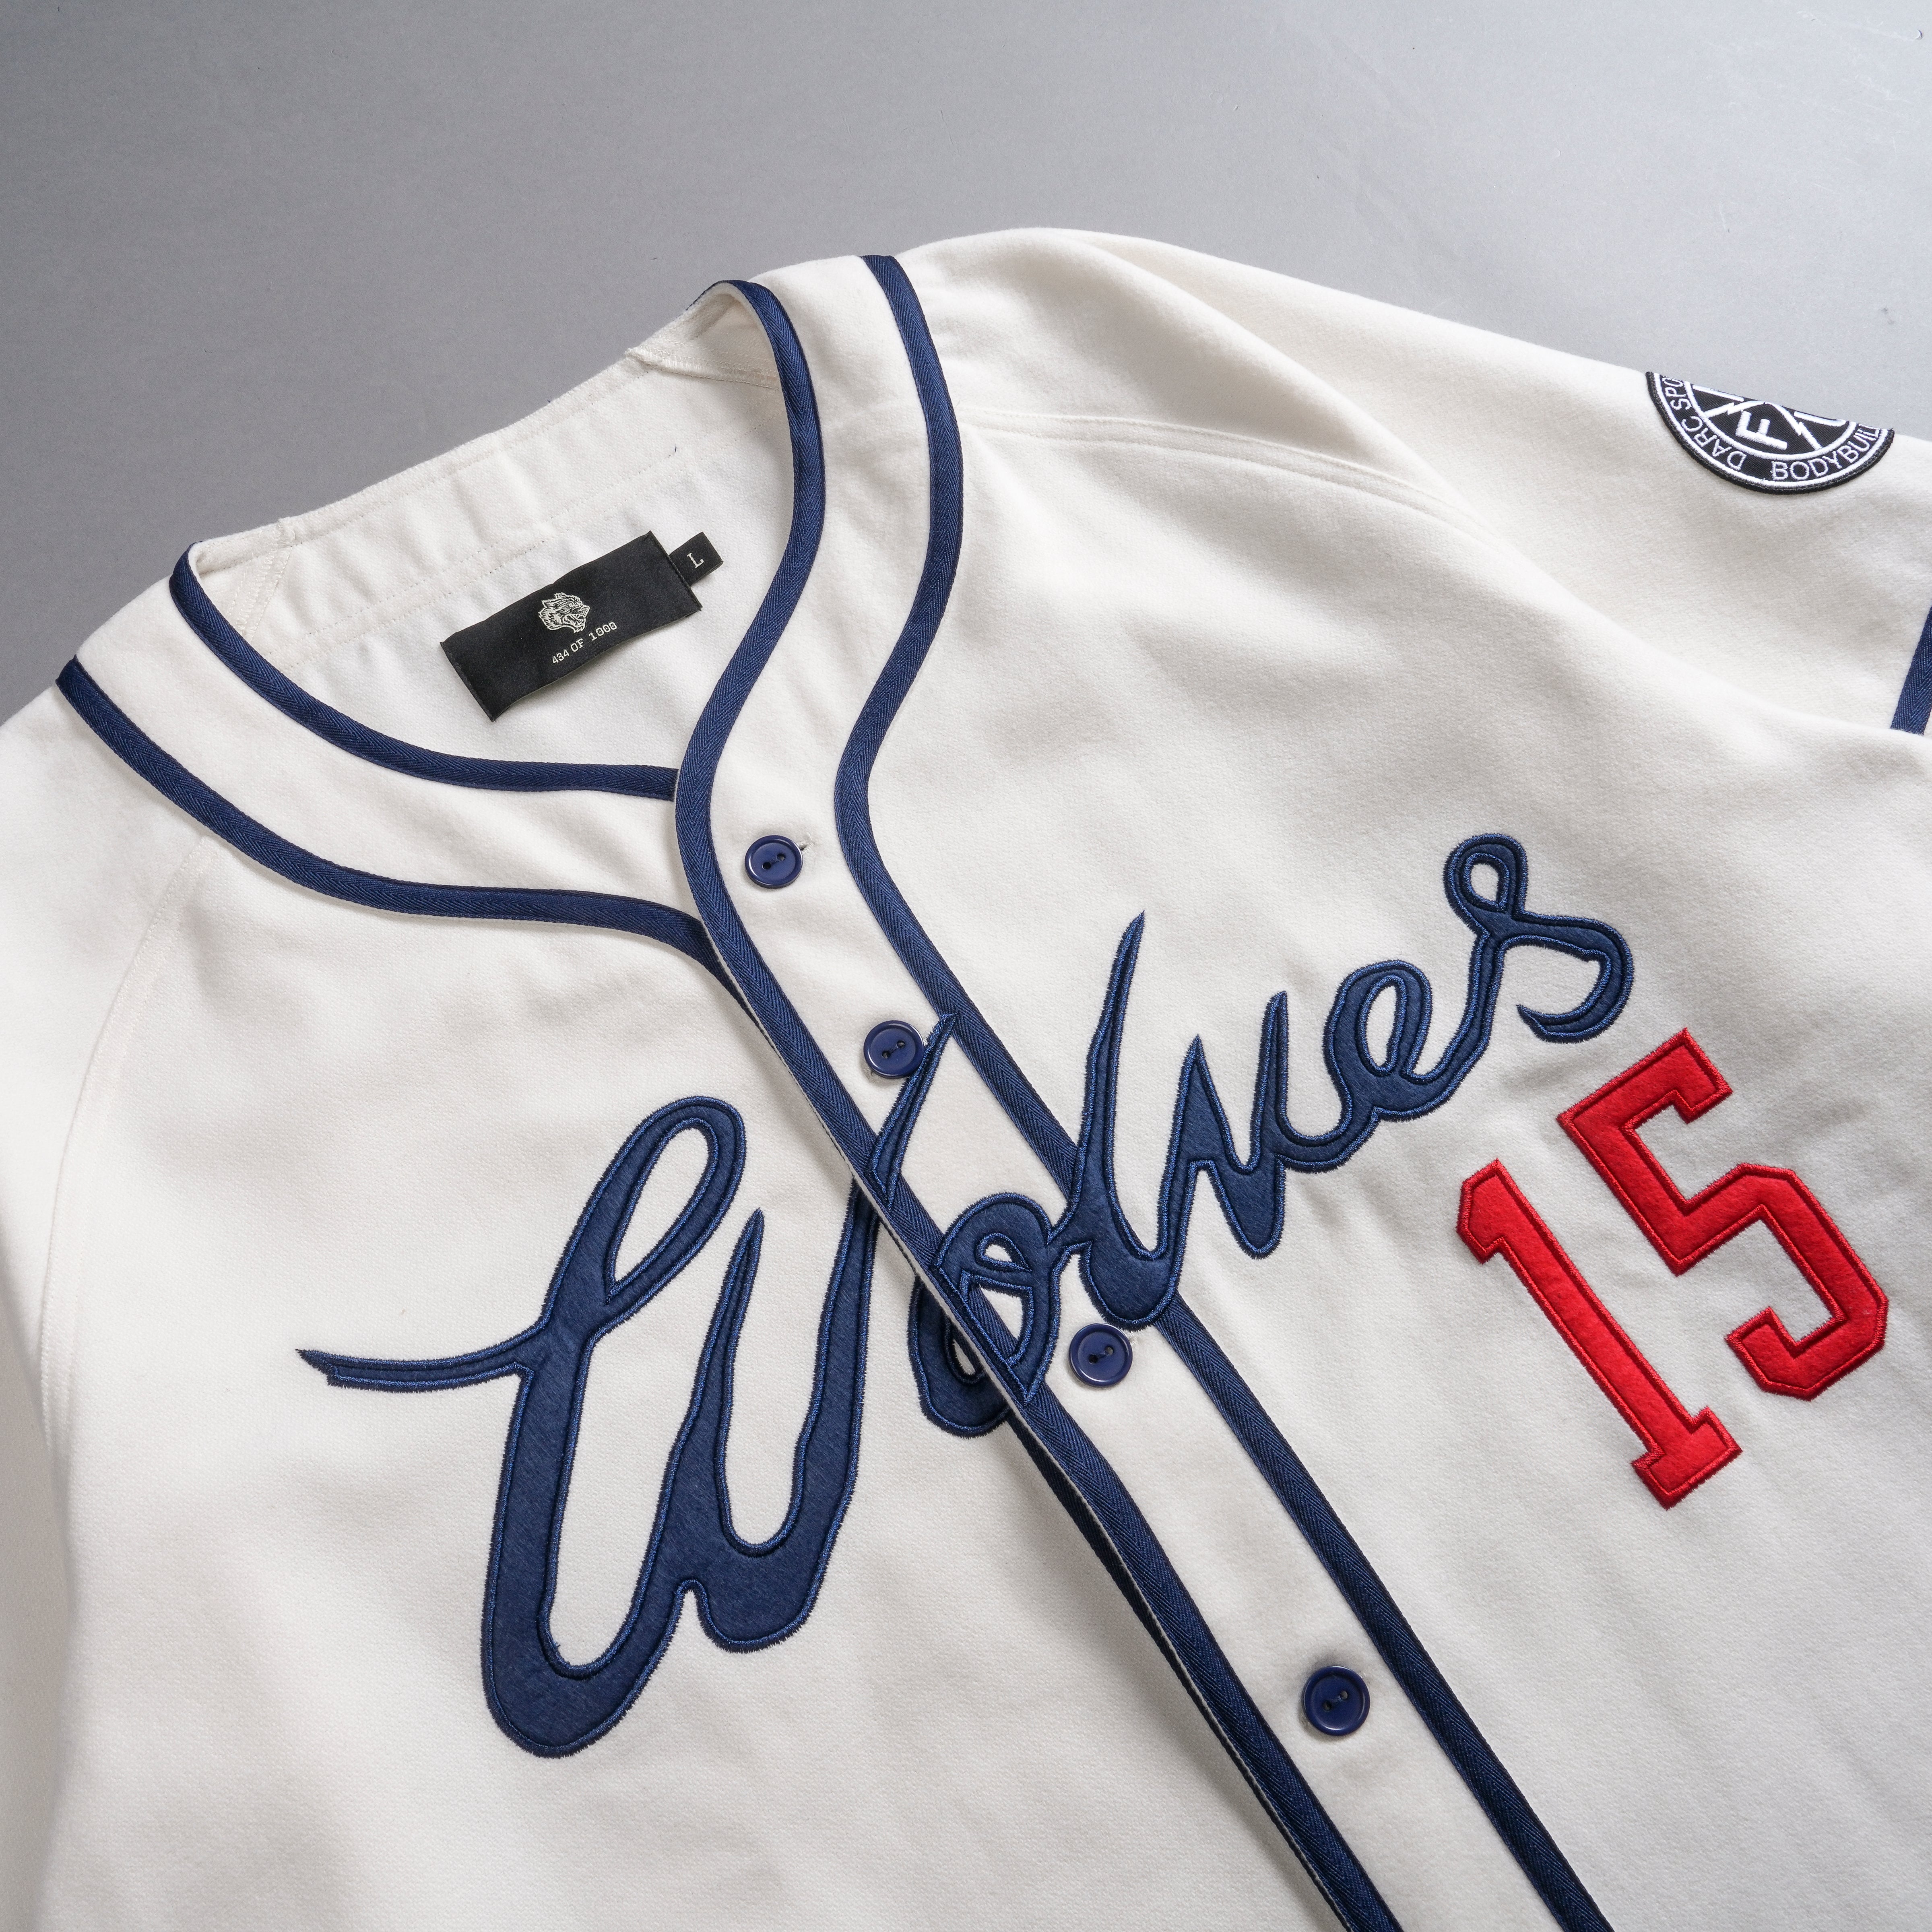 Our League Baseball Jersey in Cream